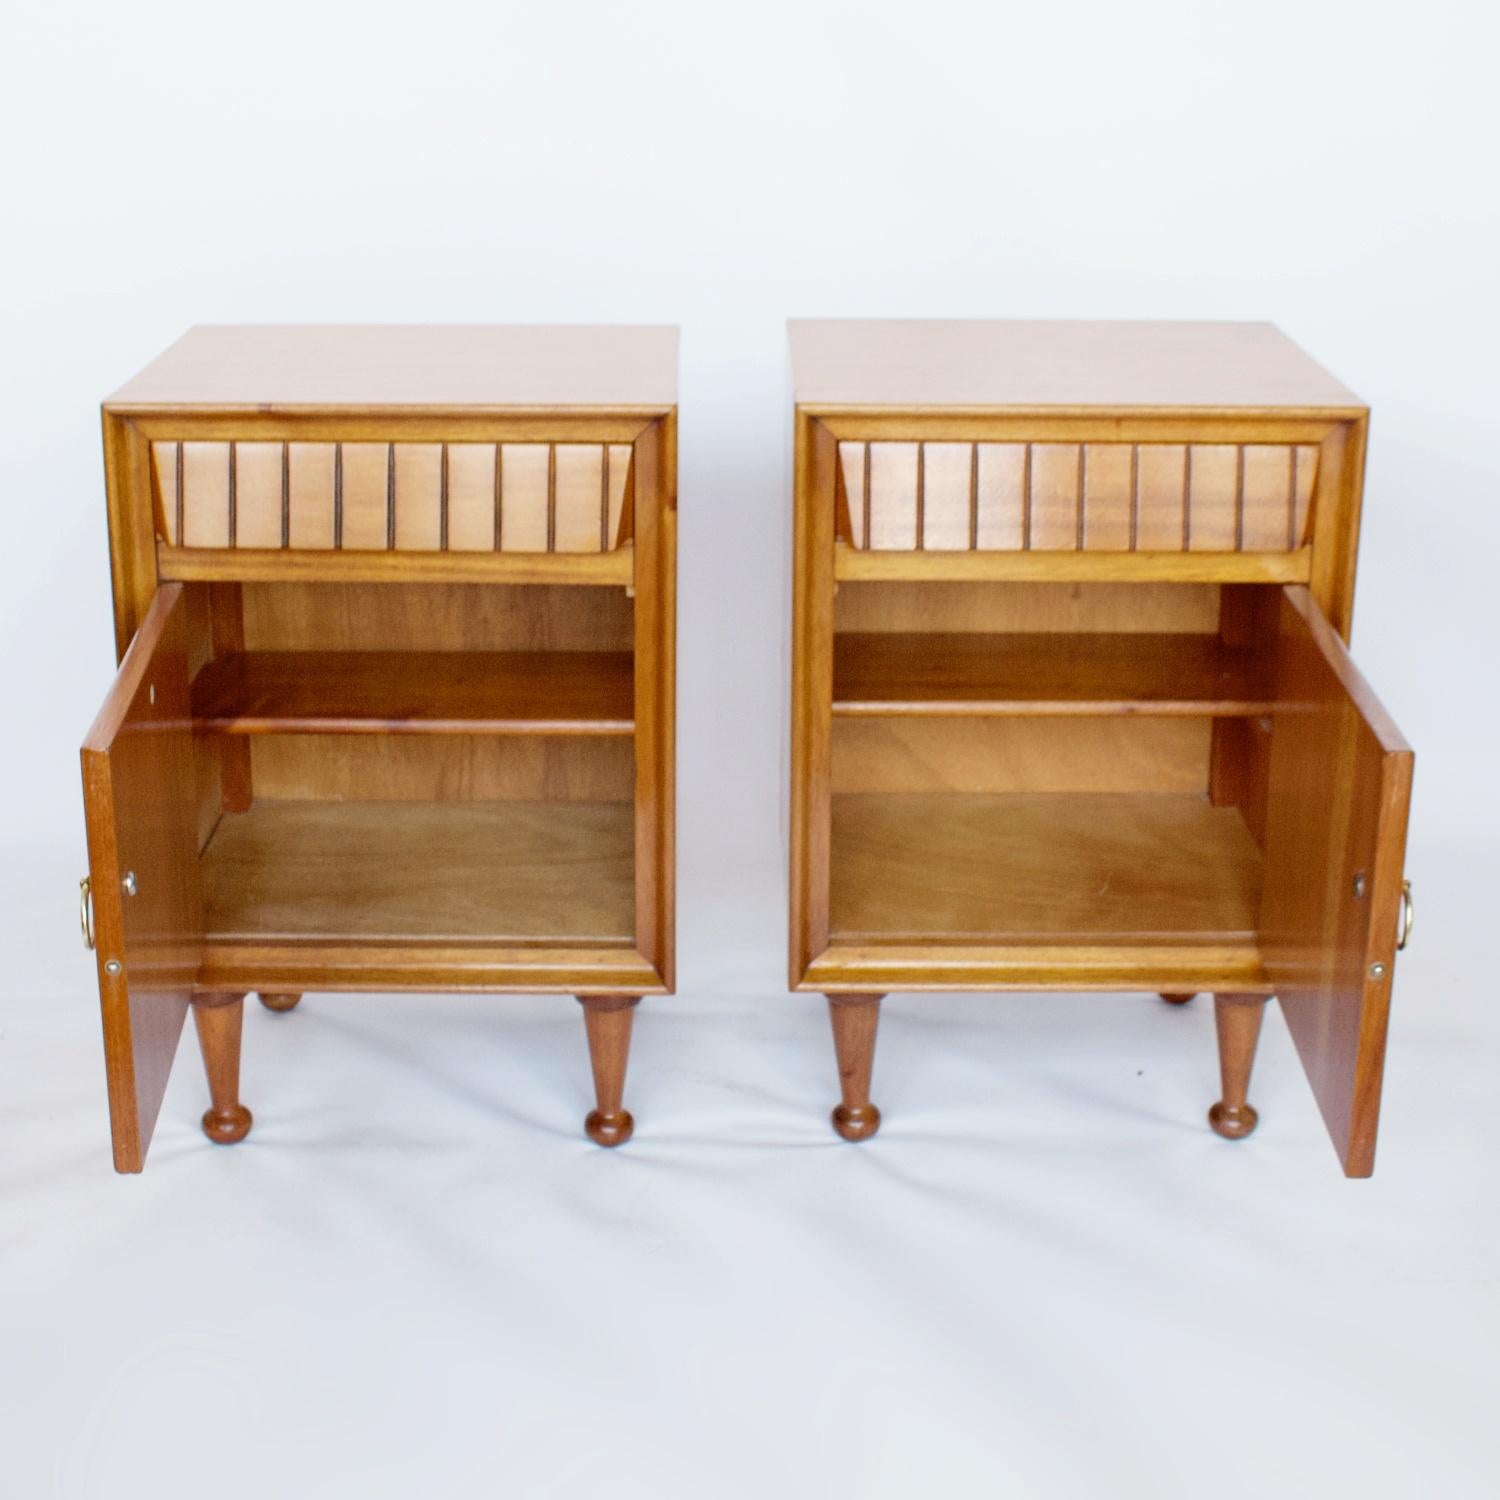 A pair of bedside cabinets by Heal's of London. Veneered satin birch with mahogany lined upper drawer and central cupboard. Stamped Heal's to inside of cupboard door. 

Dimensions: H 61cm W 41cm D 33cm 

Origin: English

Date: Circa, 1950

